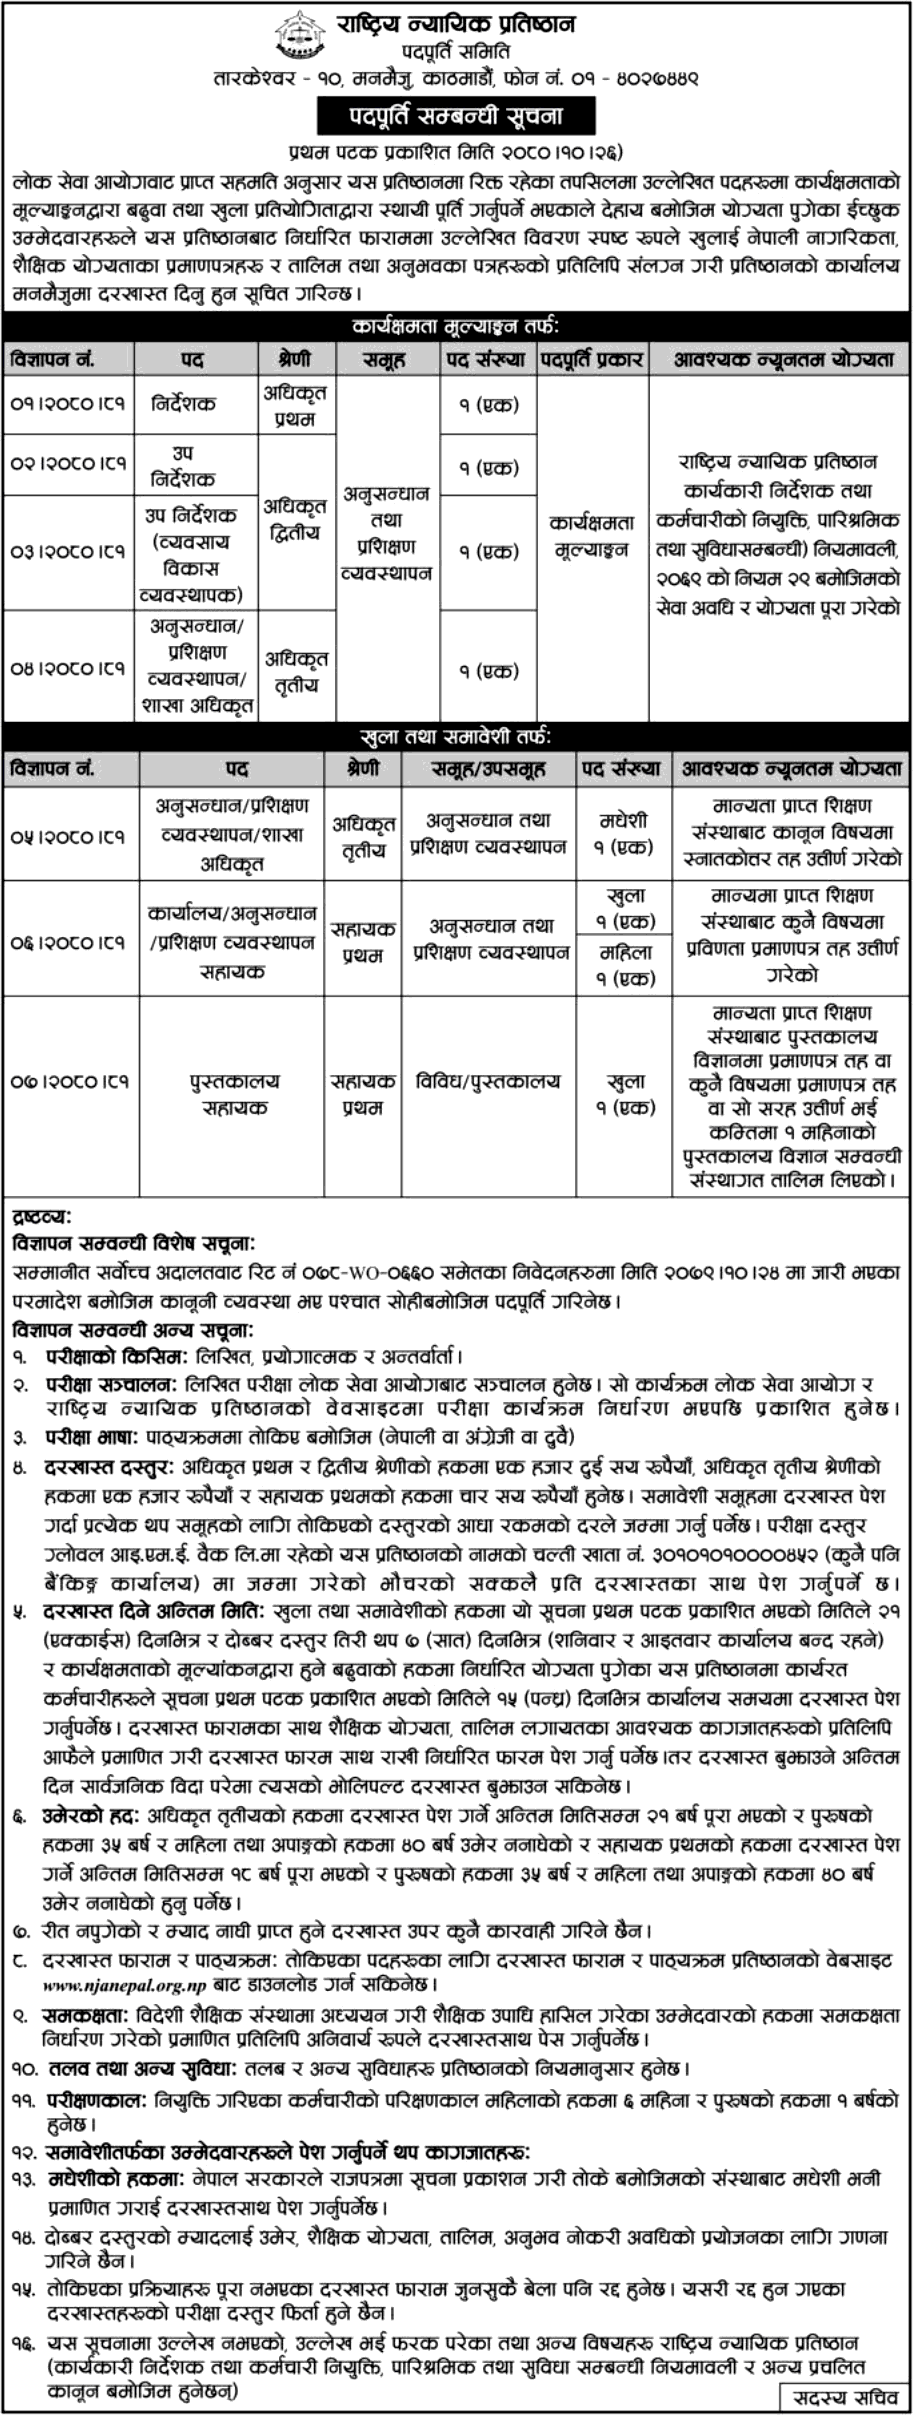 6636__National-Judicial-Academy-Vacancy-for-Various-Positions-2080.png